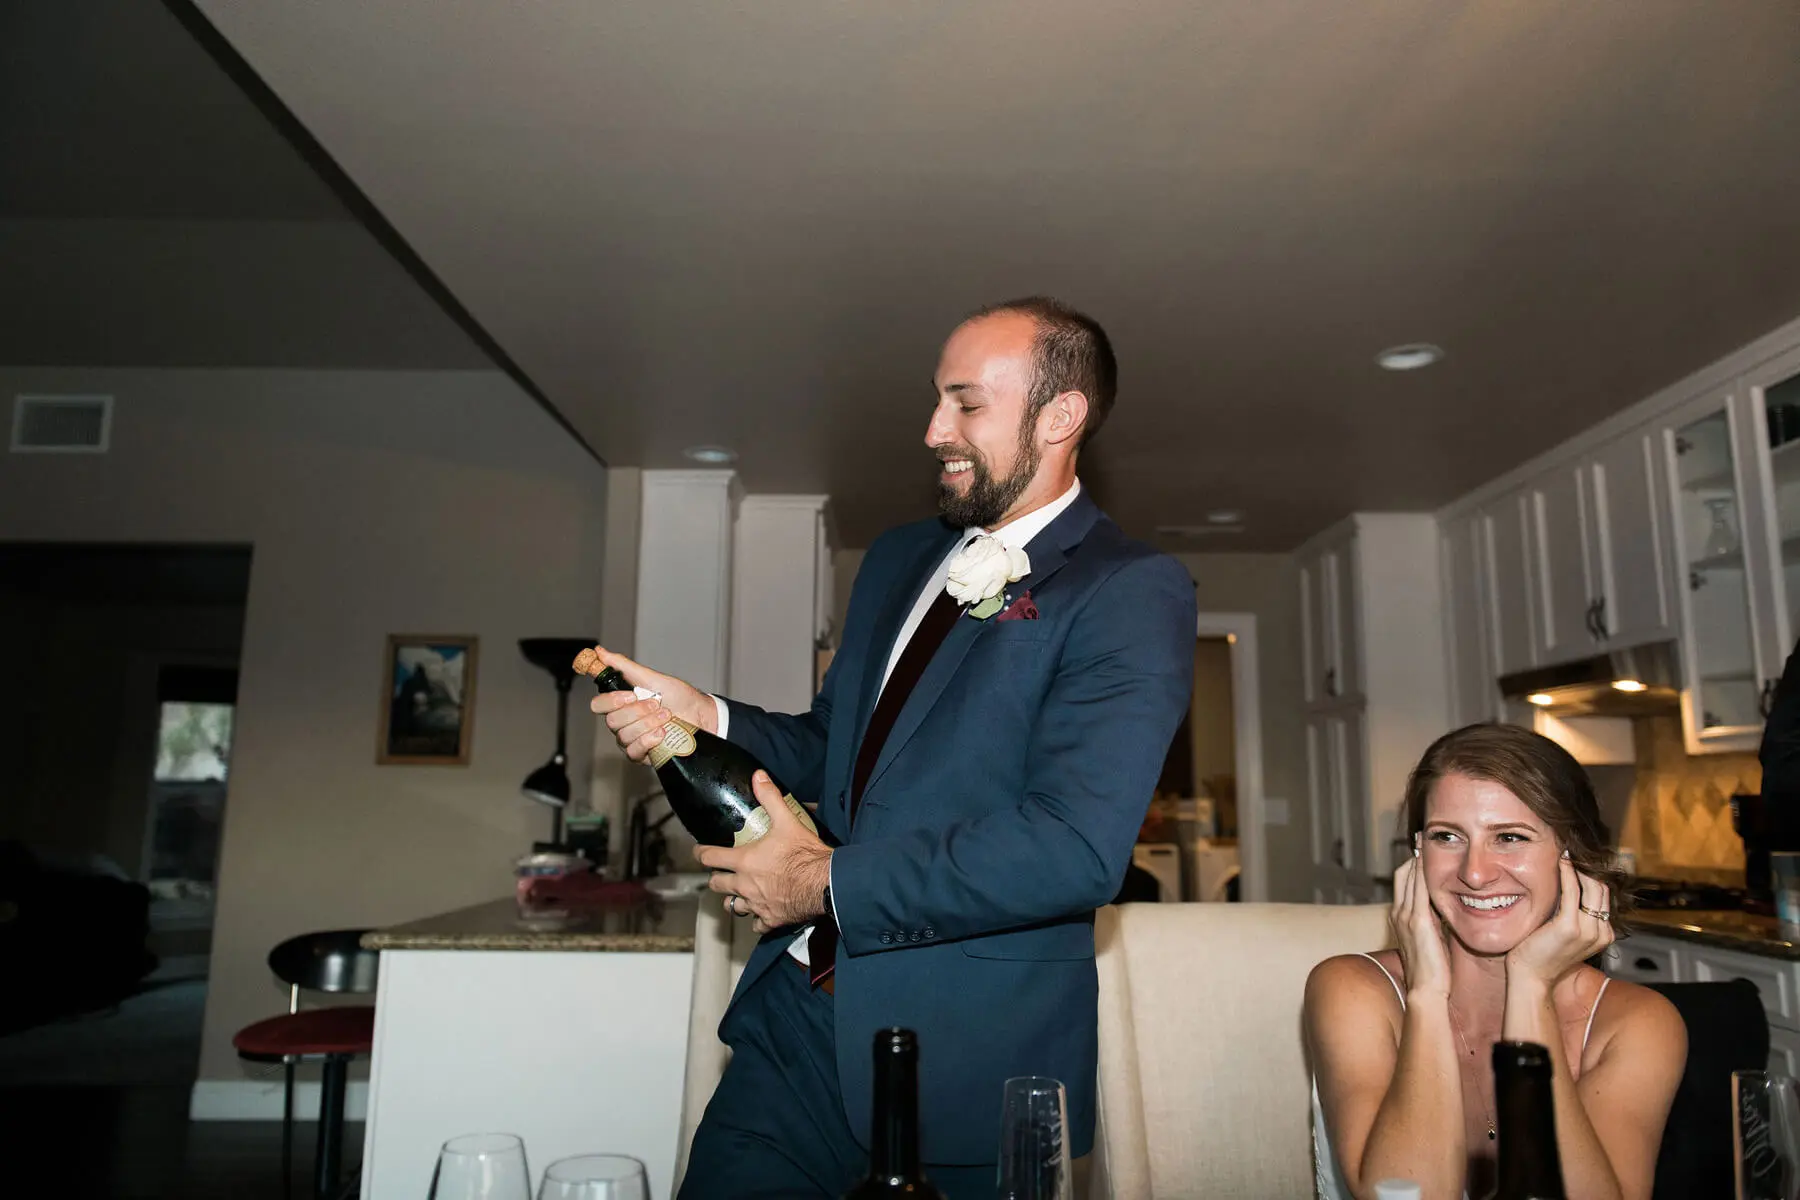 groom popping bottle of champagne while bride smiles and covers ears